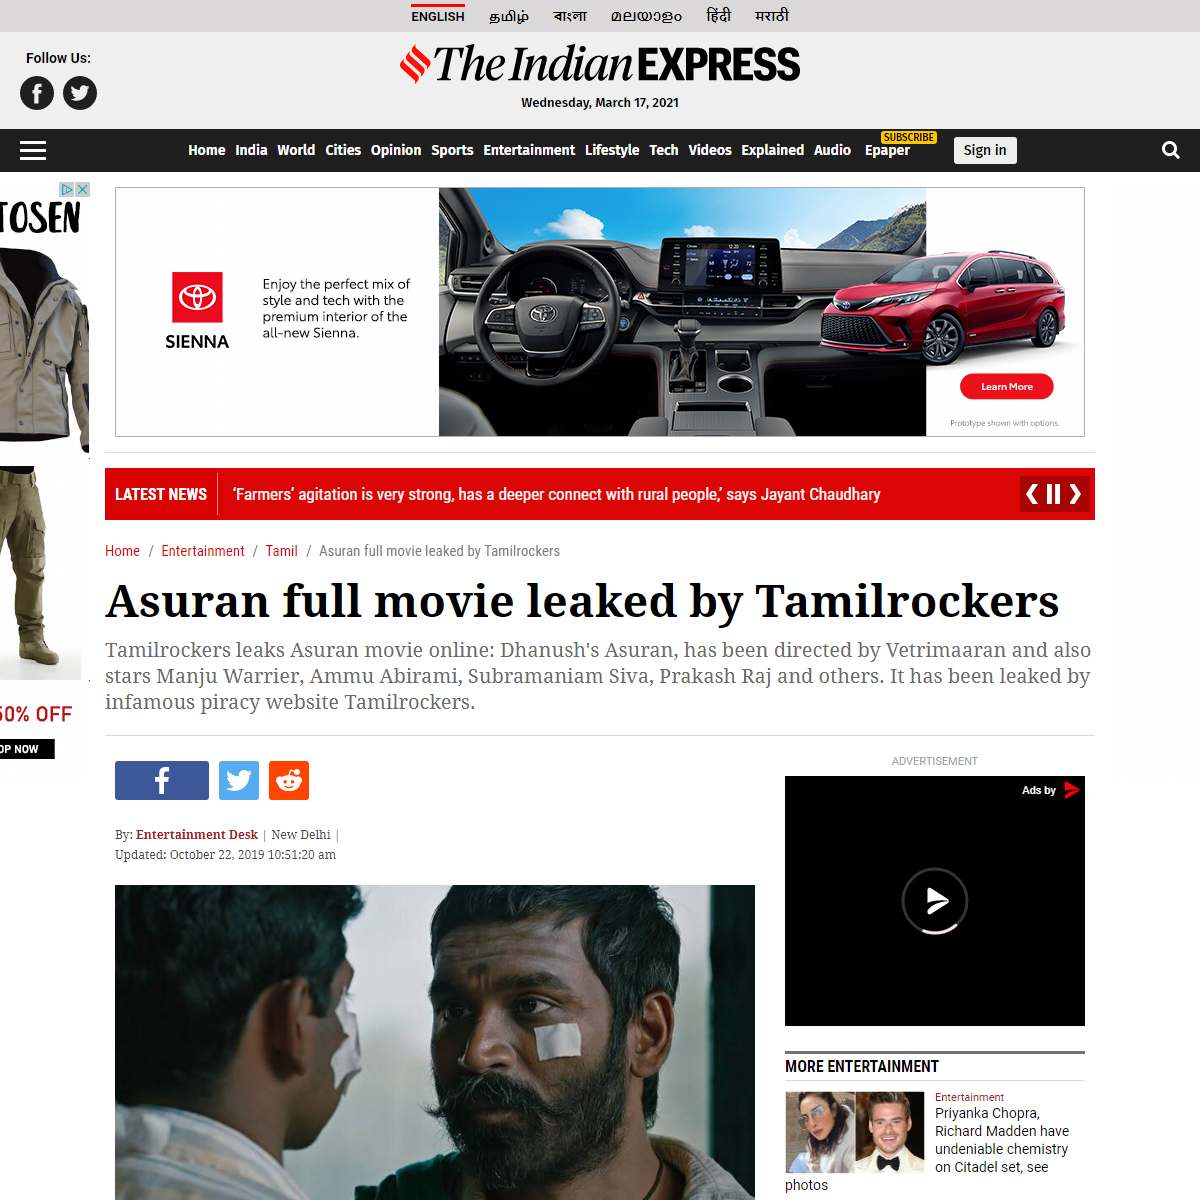 A complete backup of https://indianexpress.com/article/entertainment/tamil/asuran-full-movie-leaked-by-tamilrockers-dhanush-6053